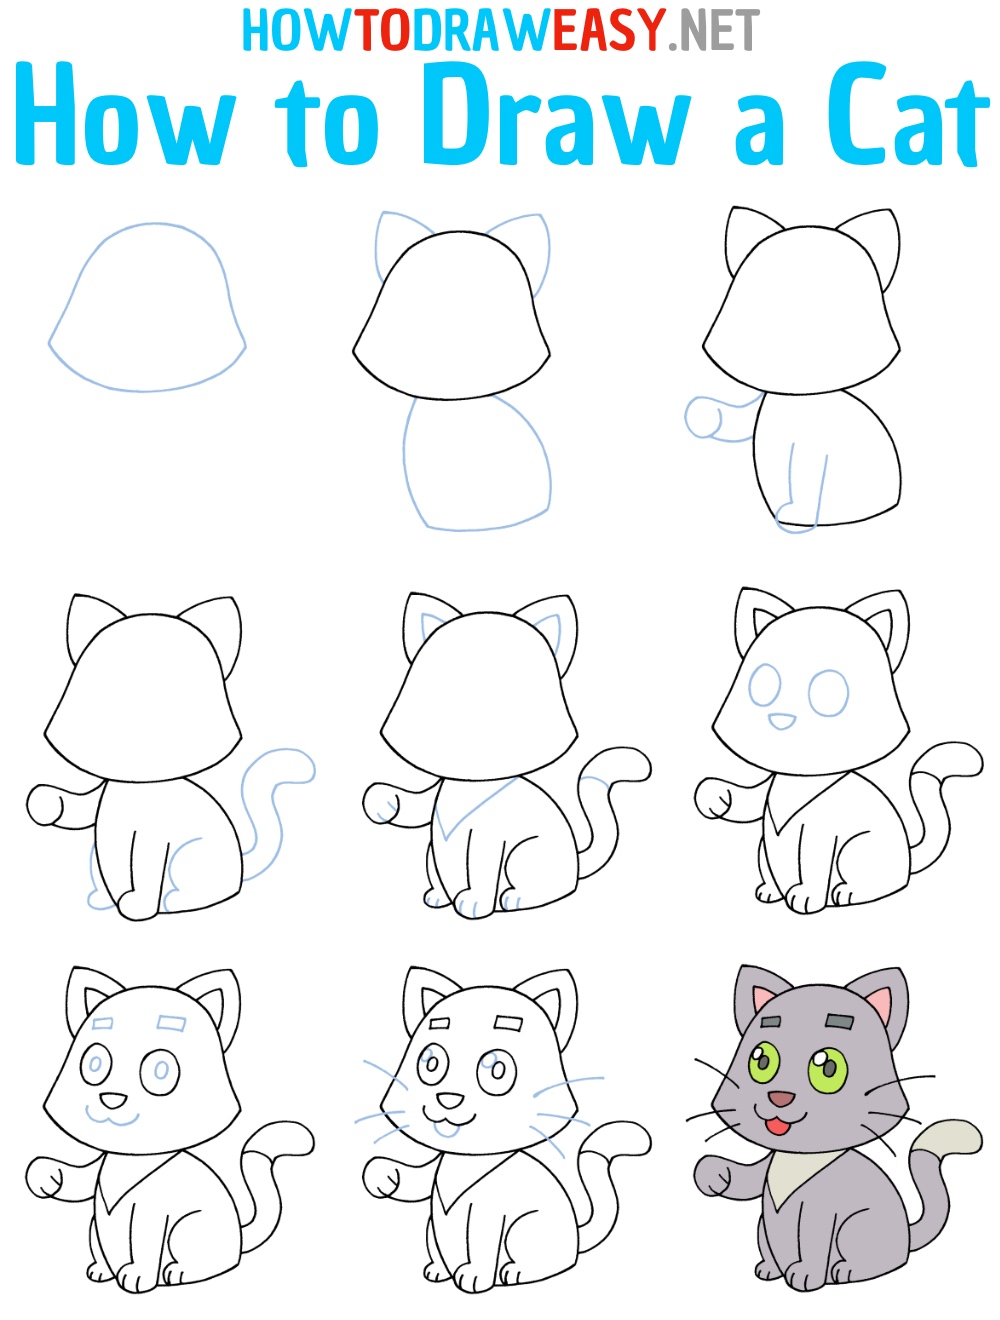 How to Draw an Easy Cat Step by Step